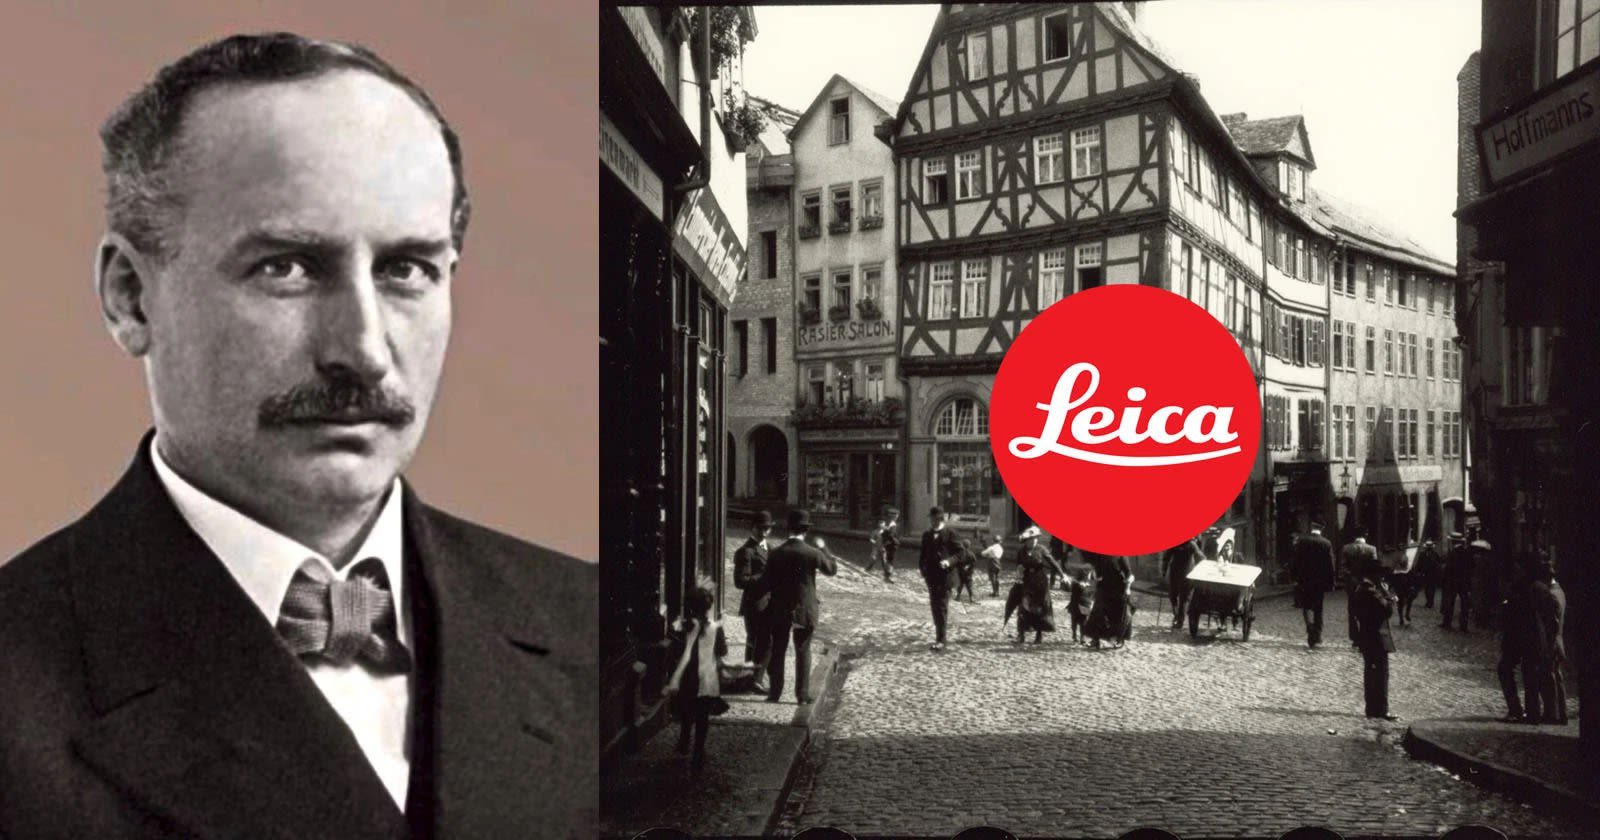 Upcoming Film Explores How Leica's Founding Family Helped Jews in WWII